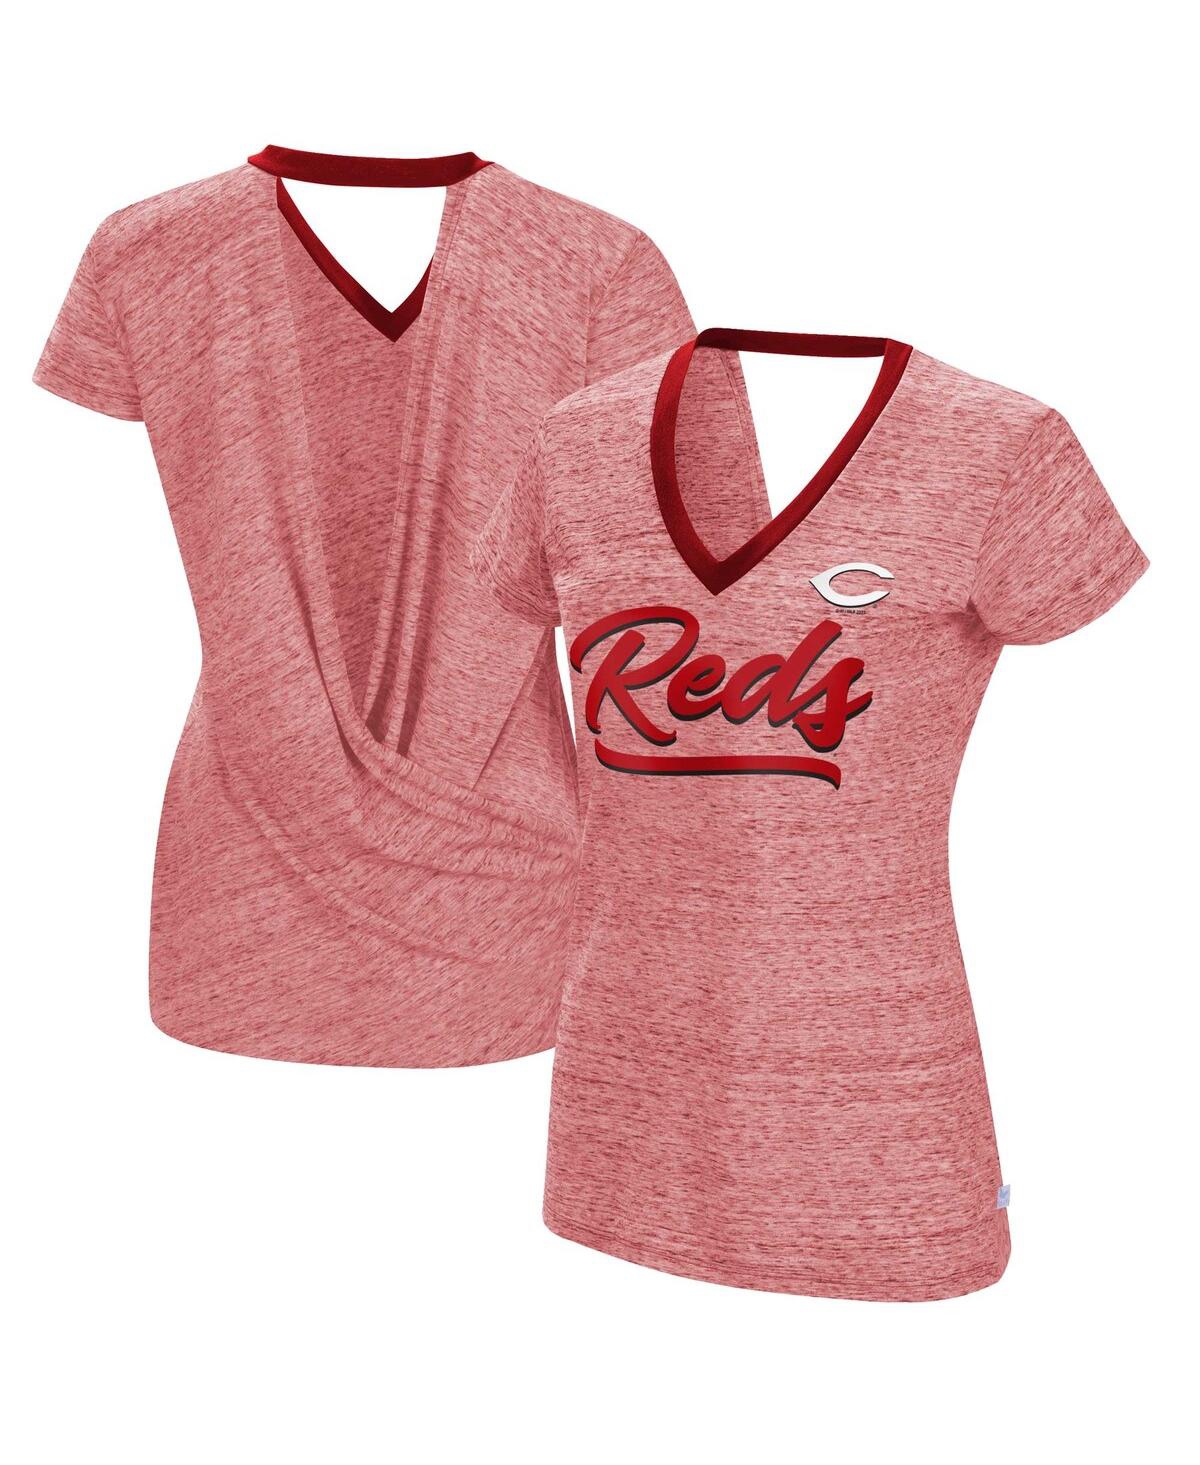 Women's Touch Red Cincinnati Reds Halftime Back Wrap Top V-Neck T-shirt - Red